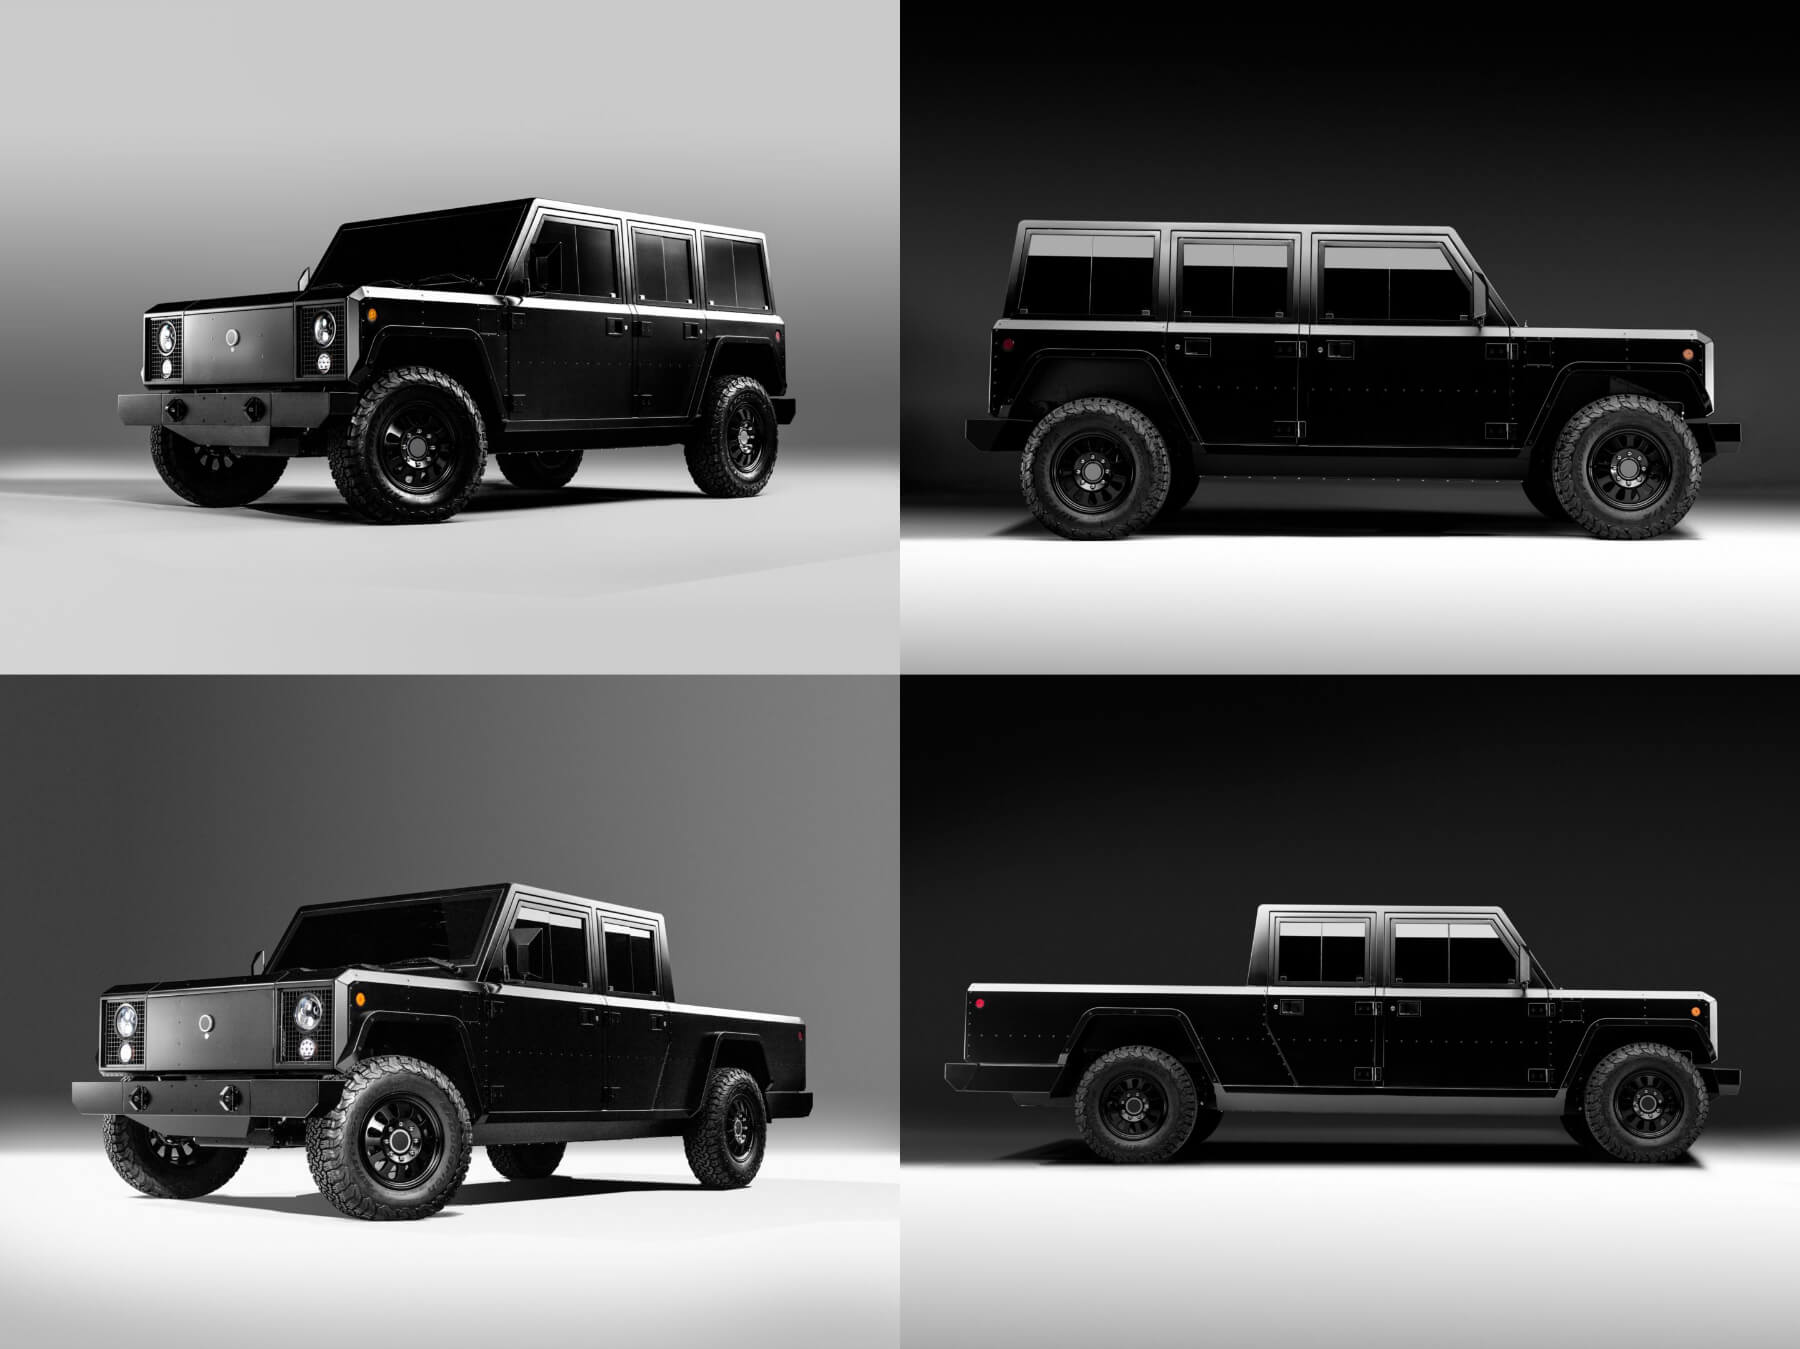 Bollinger shows off two utilitarian EV prototypes with a 7,500 lb towing capacity